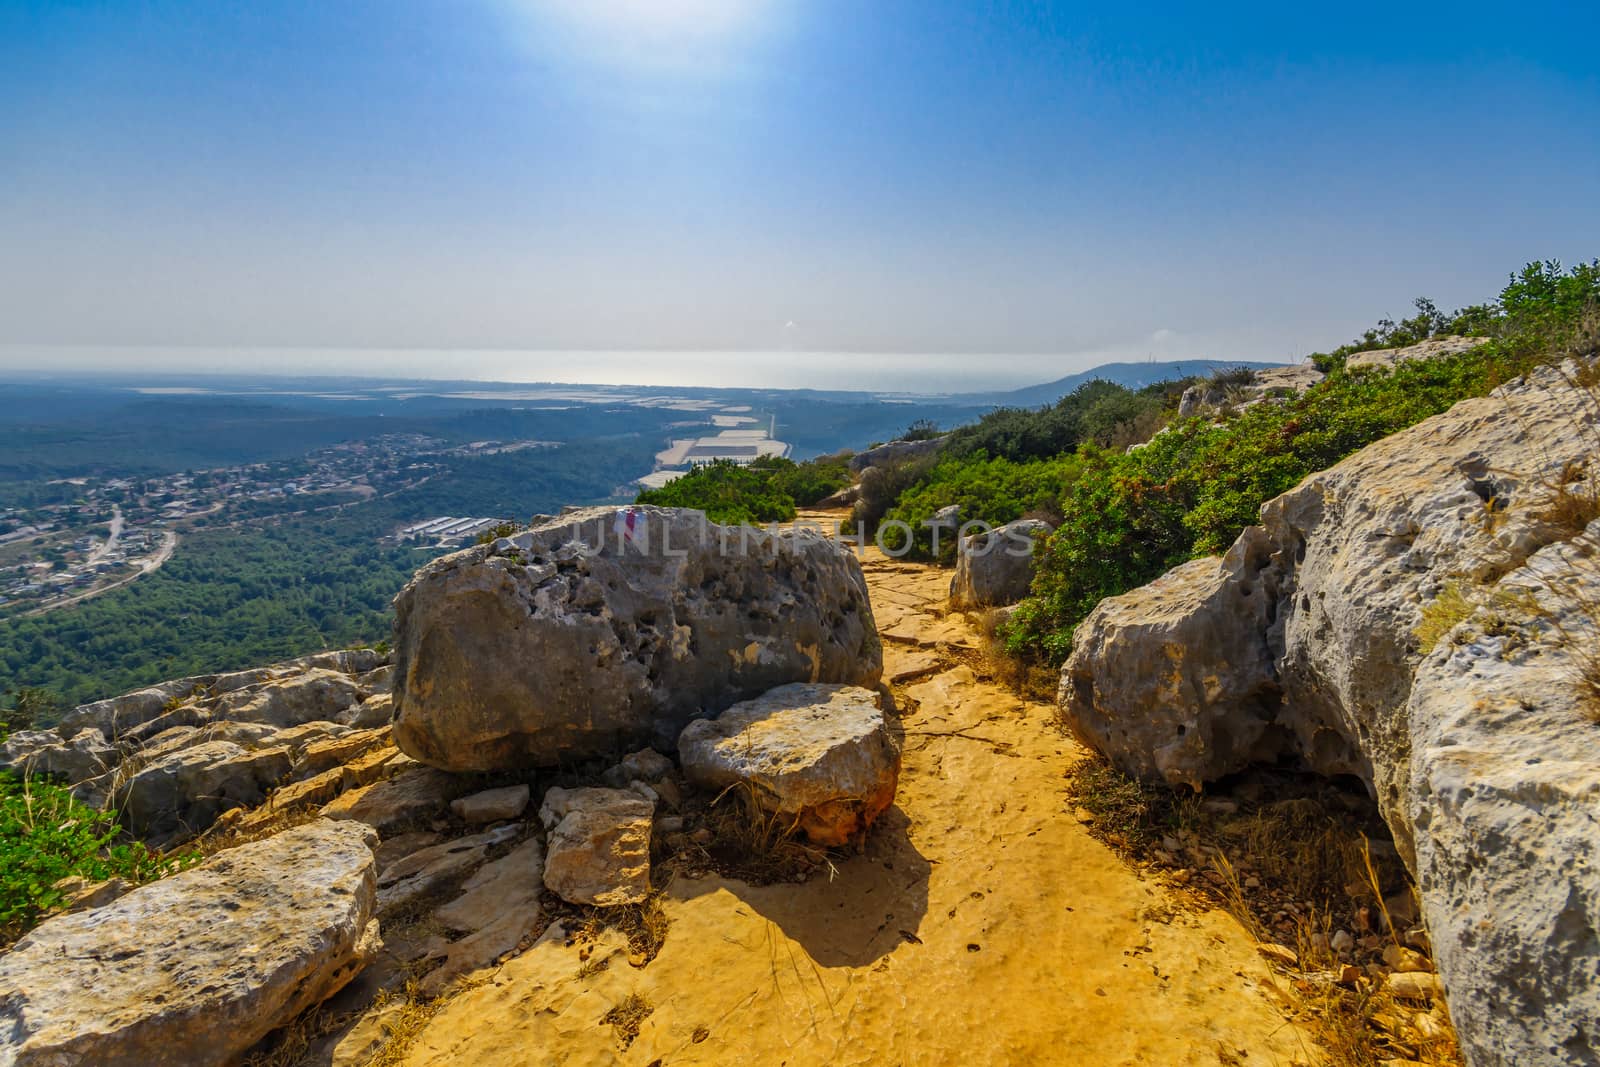 View of Western Galilee landscape, with a footpath and the Mediterranean Sea, in Adamit Park, Northern Israel